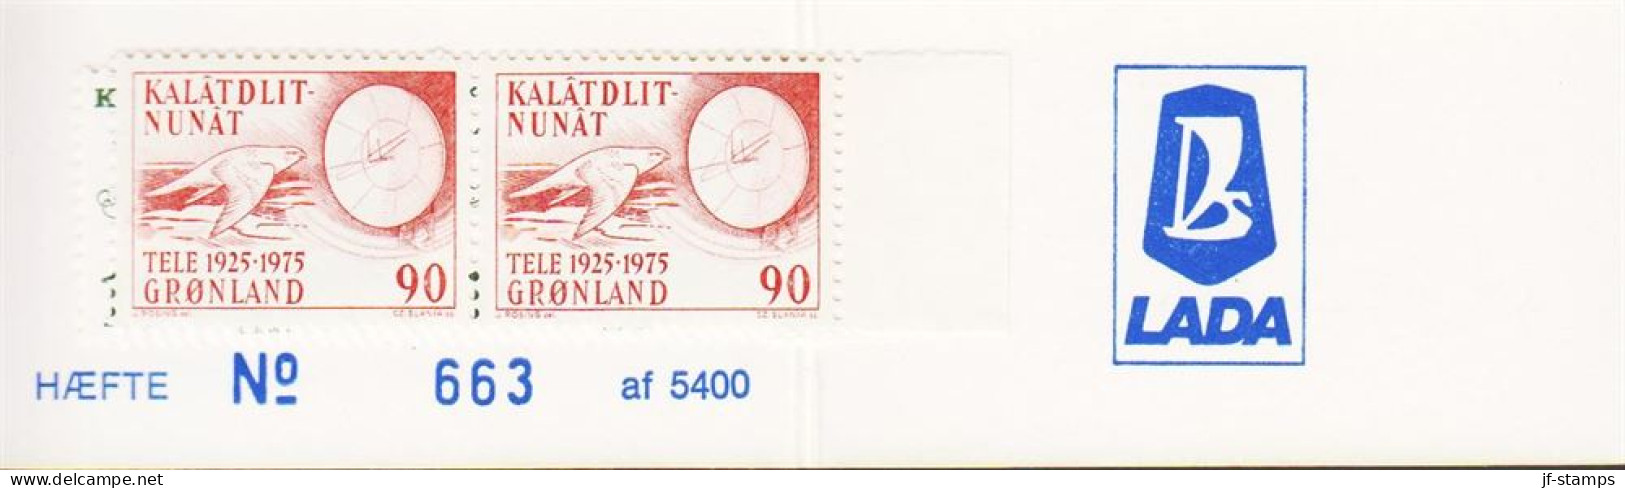 1977. GRØNLAND. TELE 90 Øre Falcon In Pair Together With 10 Øre Margrethe In Pair. DANSK ... (Michel 94 + 84) - JF545589 - Nuovi